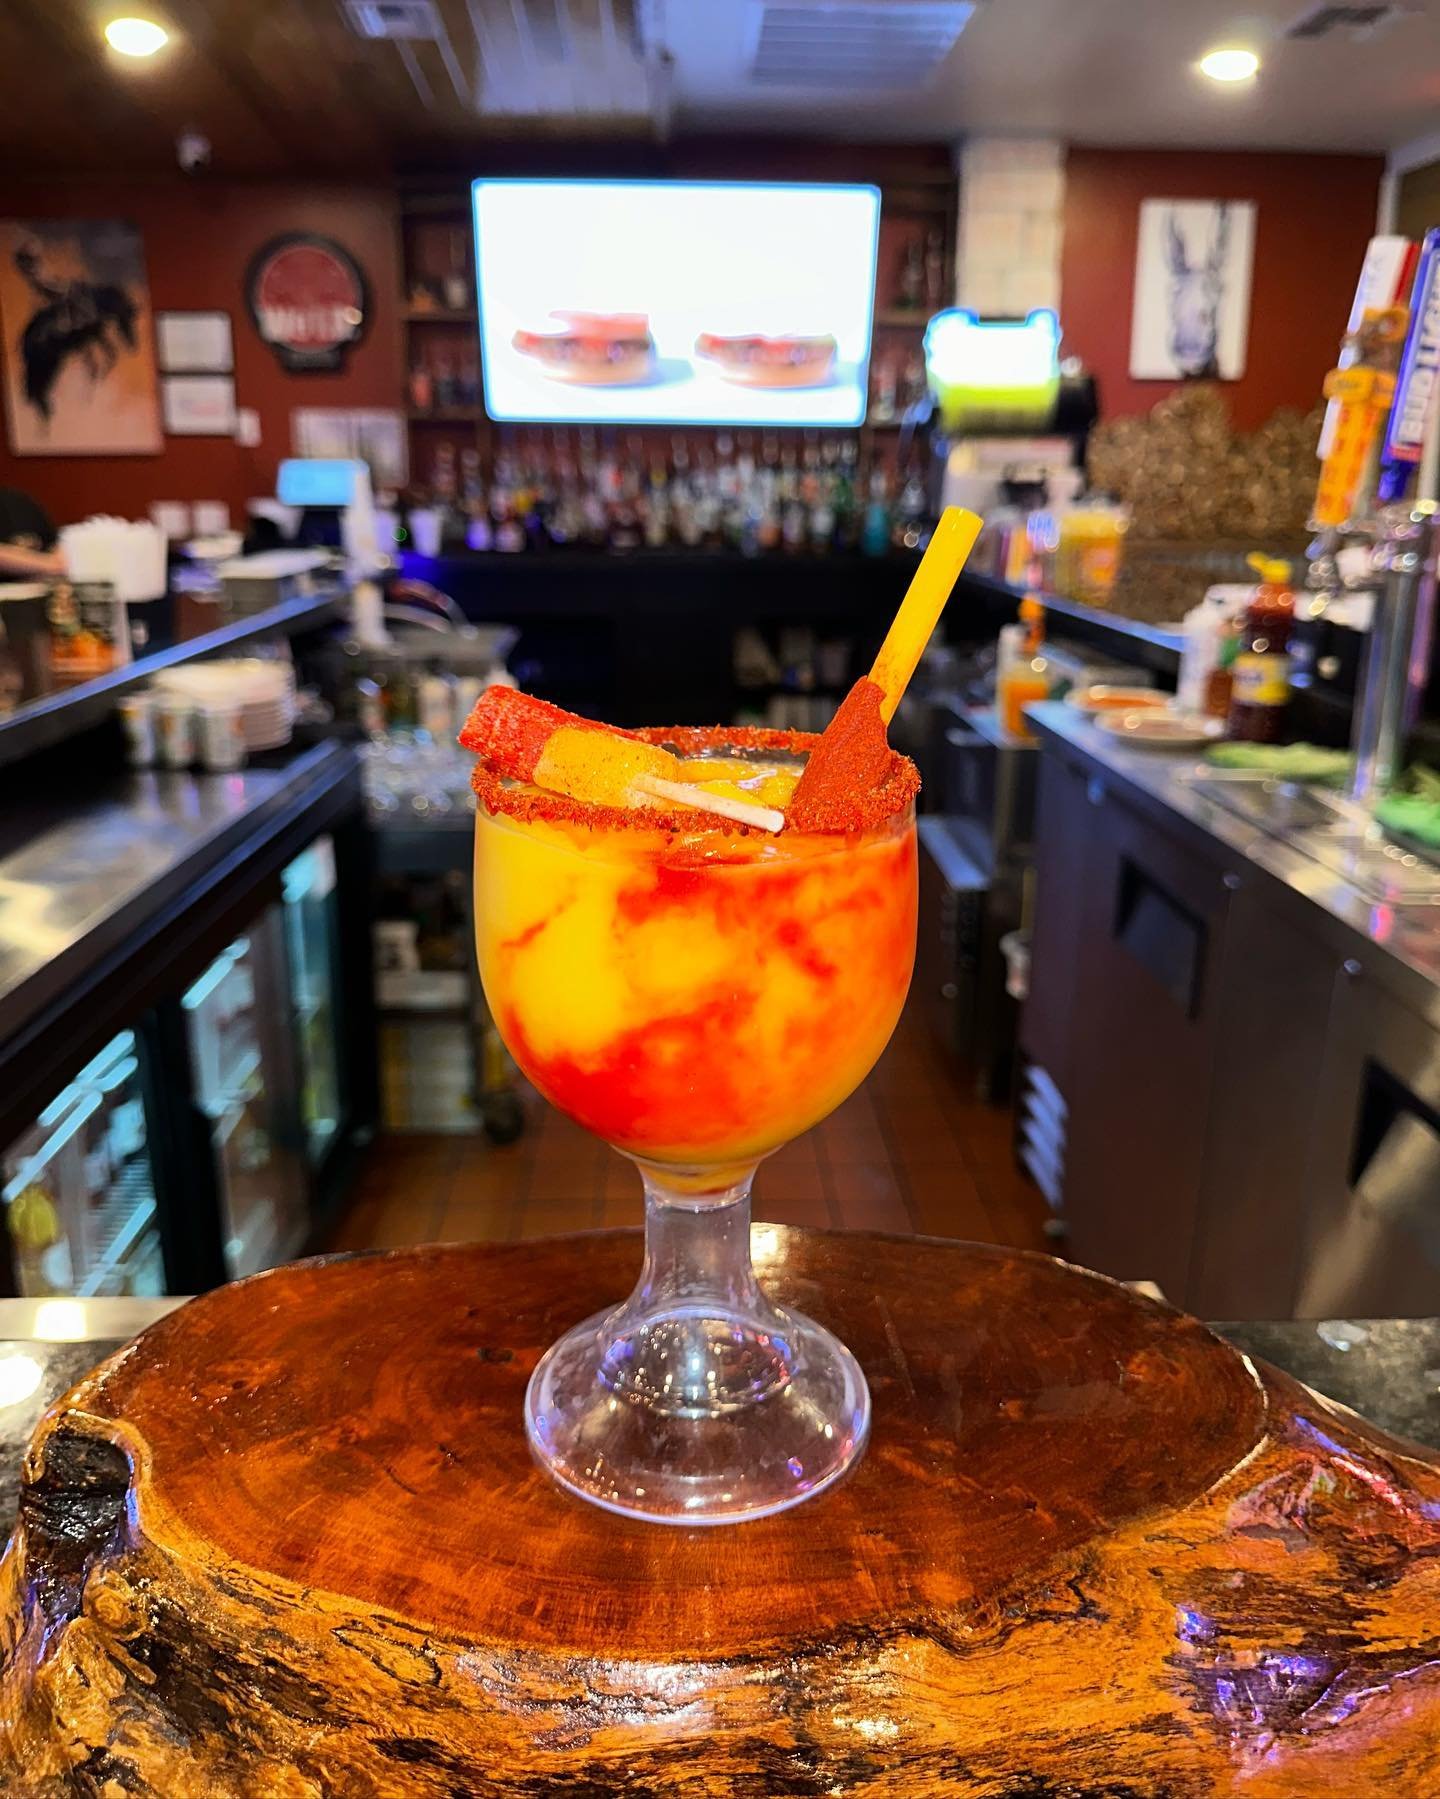 Come Celebrate Cinco de Mayo with us and try one of our Bar specials today!🎉
&bull;$3 import bottles🍺
&bull;$4 Draft 🍻 
&bull;$5 Mangonada 🍹
&bull;$5 Mexican Fruit Cup shot🥃
&bull;$7 Mexican martini 🍸